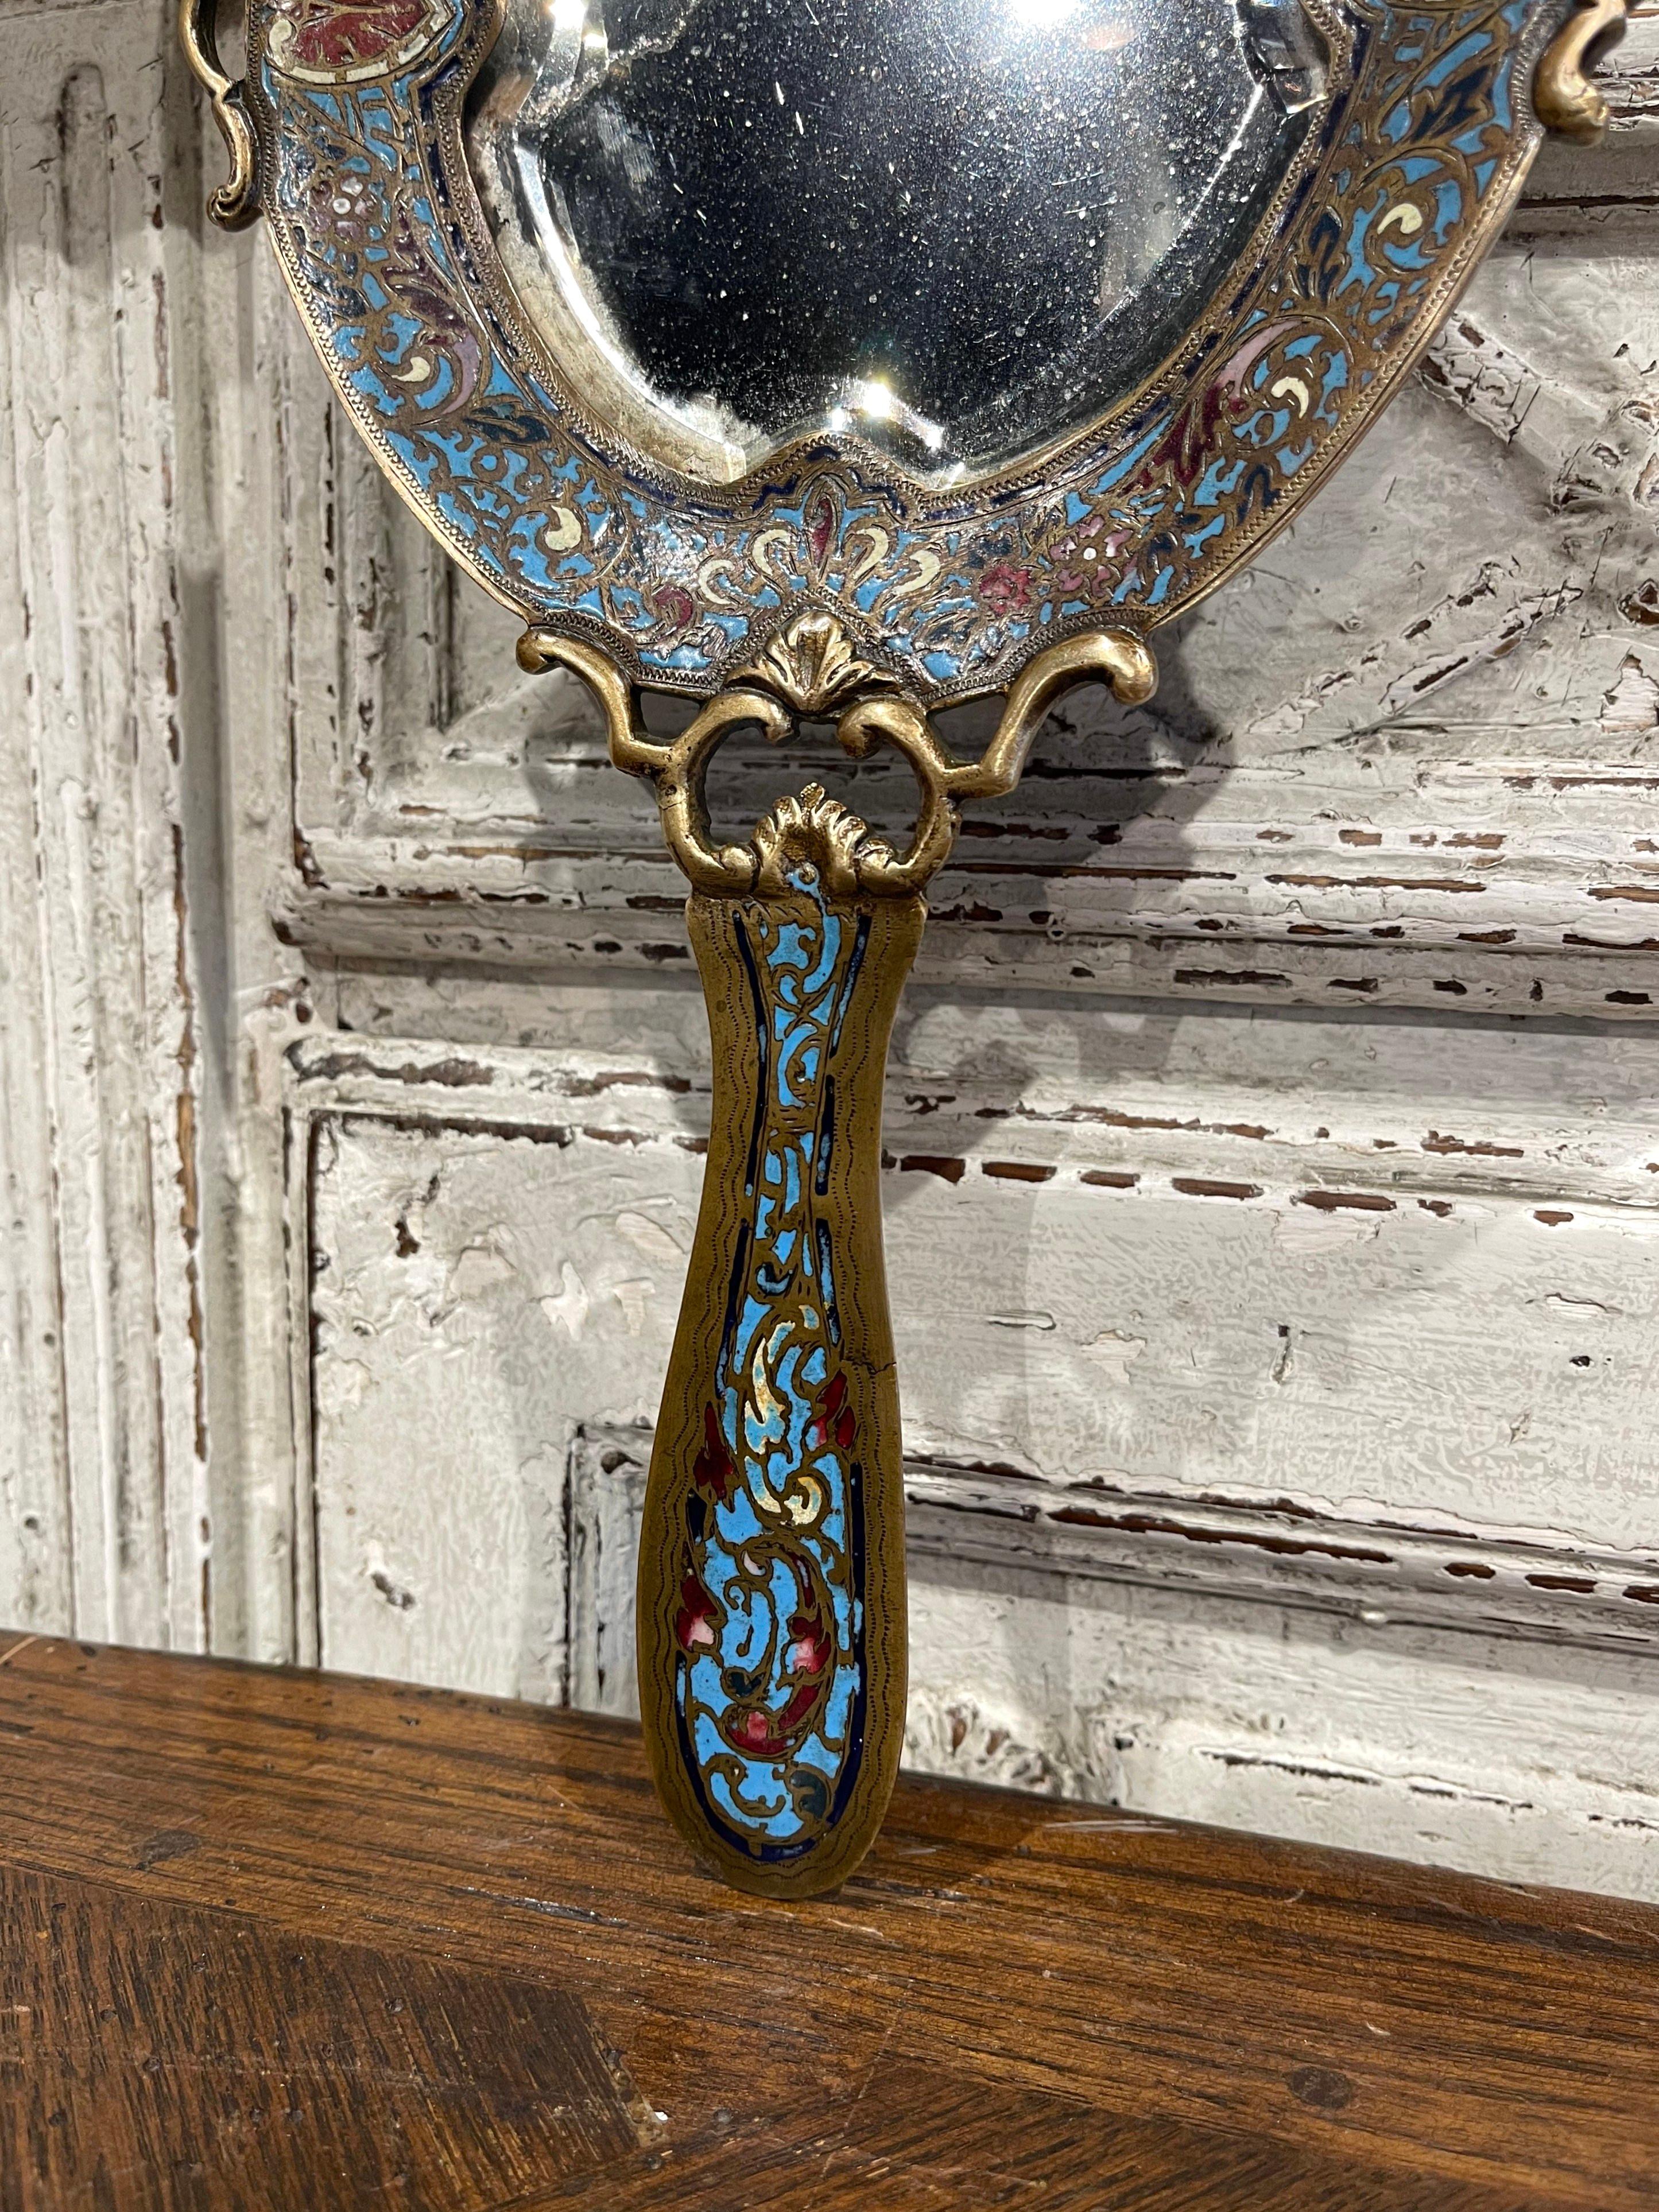 19th Century French Brass and Champleve Hand Vanity Mirror with Beveled Glass In Excellent Condition For Sale In Dallas, TX